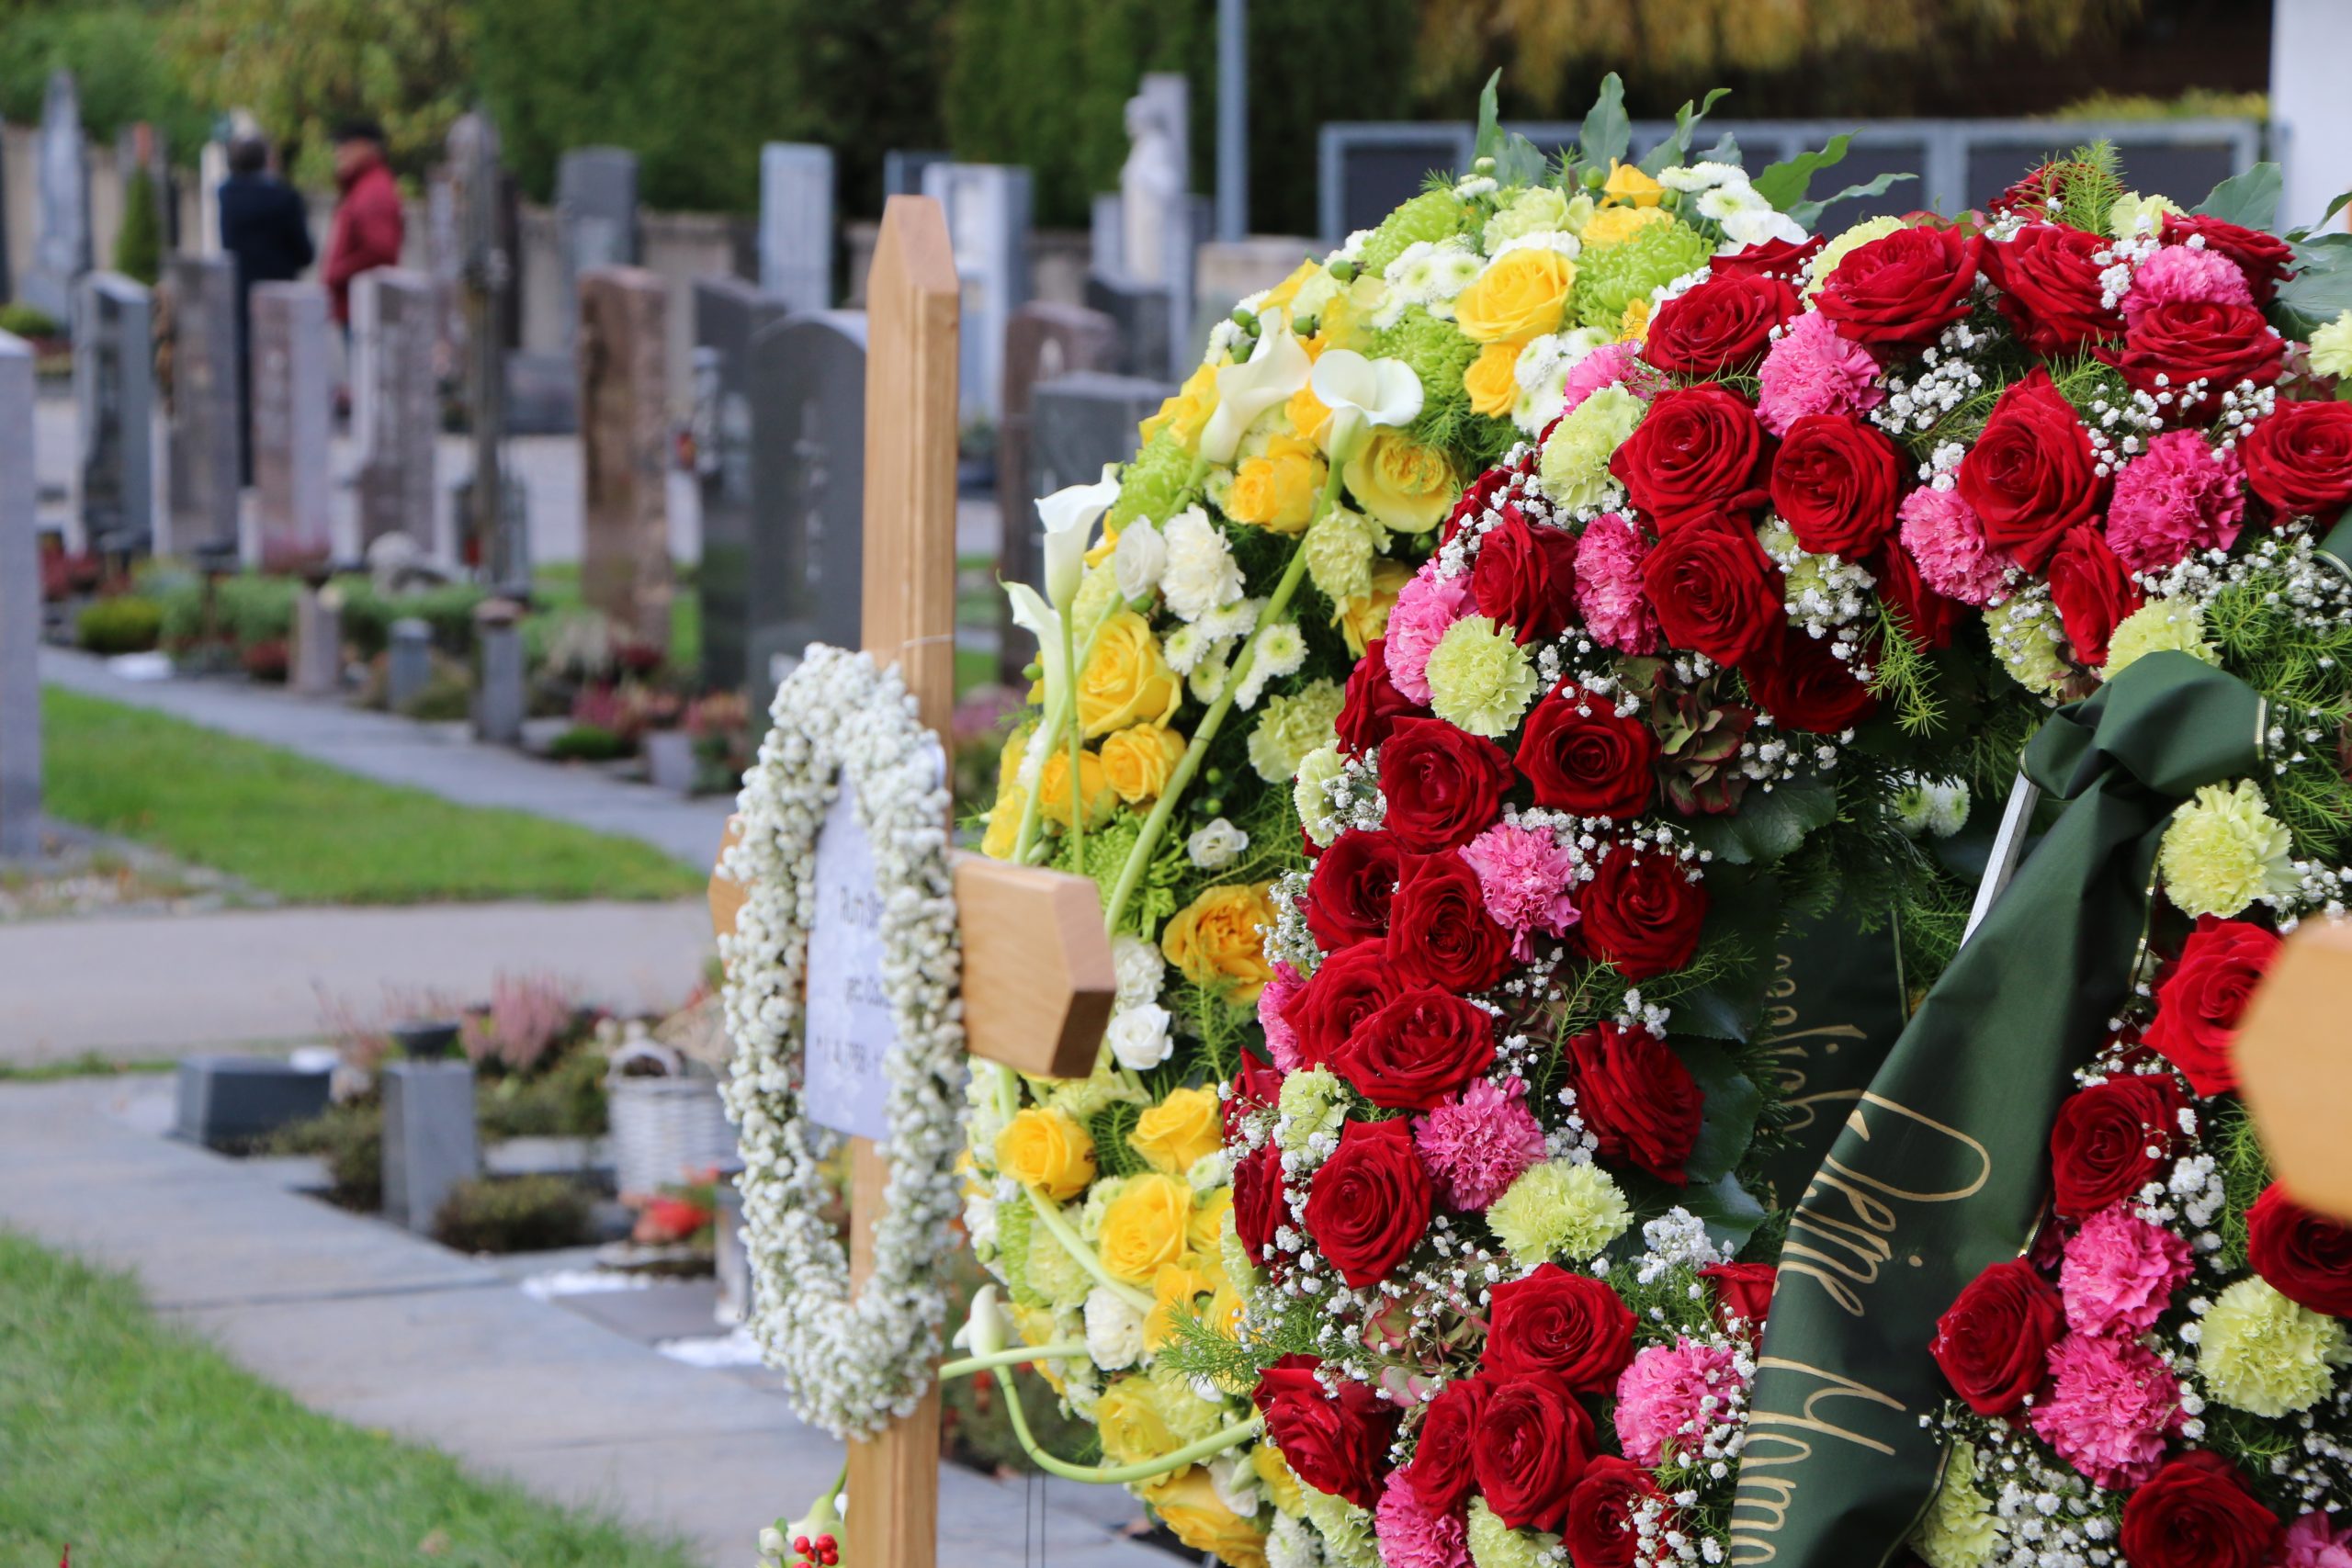 At,The,Cemetery,,Floral,Decorations,After,A,Funeral